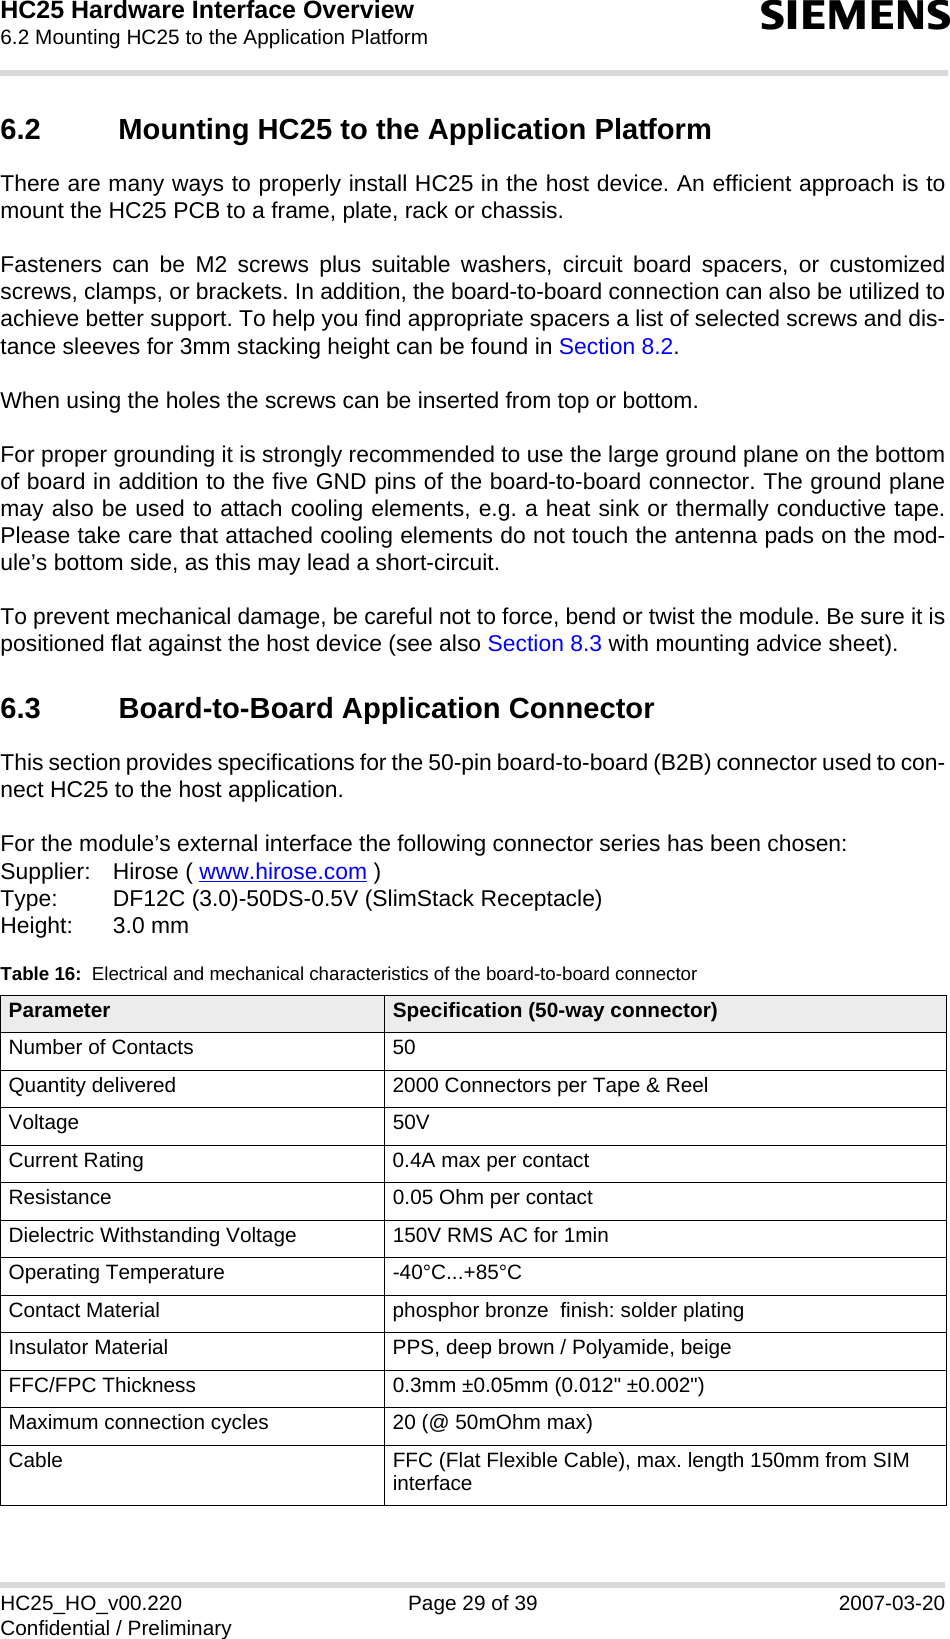 HC25 Hardware Interface Overview6.2 Mounting HC25 to the Application Platform30sHC25_HO_v00.220 Page 29 of 39 2007-03-20Confidential / Preliminary6.2 Mounting HC25 to the Application PlatformThere are many ways to properly install HC25 in the host device. An efficient approach is tomount the HC25 PCB to a frame, plate, rack or chassis. Fasteners can be M2 screws plus suitable washers, circuit board spacers, or customizedscrews, clamps, or brackets. In addition, the board-to-board connection can also be utilized toachieve better support. To help you find appropriate spacers a list of selected screws and dis-tance sleeves for 3mm stacking height can be found in Section 8.2.When using the holes the screws can be inserted from top or bottom. For proper grounding it is strongly recommended to use the large ground plane on the bottomof board in addition to the five GND pins of the board-to-board connector. The ground planemay also be used to attach cooling elements, e.g. a heat sink or thermally conductive tape.Please take care that attached cooling elements do not touch the antenna pads on the mod-ule’s bottom side, as this may lead a short-circuit. To prevent mechanical damage, be careful not to force, bend or twist the module. Be sure it ispositioned flat against the host device (see also Section 8.3 with mounting advice sheet).6.3 Board-to-Board Application ConnectorThis section provides specifications for the 50-pin board-to-board (B2B) connector used to con-nect HC25 to the host application. For the module’s external interface the following connector series has been chosen: Supplier: Hirose ( www.hirose.com )Type: DF12C (3.0)-50DS-0.5V (SlimStack Receptacle)Height: 3.0 mmTable 16:  Electrical and mechanical characteristics of the board-to-board connectorParameter Specification (50-way connector)Number of Contacts 50Quantity delivered 2000 Connectors per Tape &amp; ReelVoltage 50VCurrent Rating 0.4A max per contactResistance 0.05 Ohm per contactDielectric Withstanding Voltage 150V RMS AC for 1minOperating Temperature -40°C...+85°CContact Material phosphor bronze  finish: solder platingInsulator Material PPS, deep brown / Polyamide, beigeFFC/FPC Thickness 0.3mm ±0.05mm (0.012&quot; ±0.002&quot;)Maximum connection cycles 20 (@ 50mOhm max)Cable FFC (Flat Flexible Cable), max. length 150mm from SIM interface